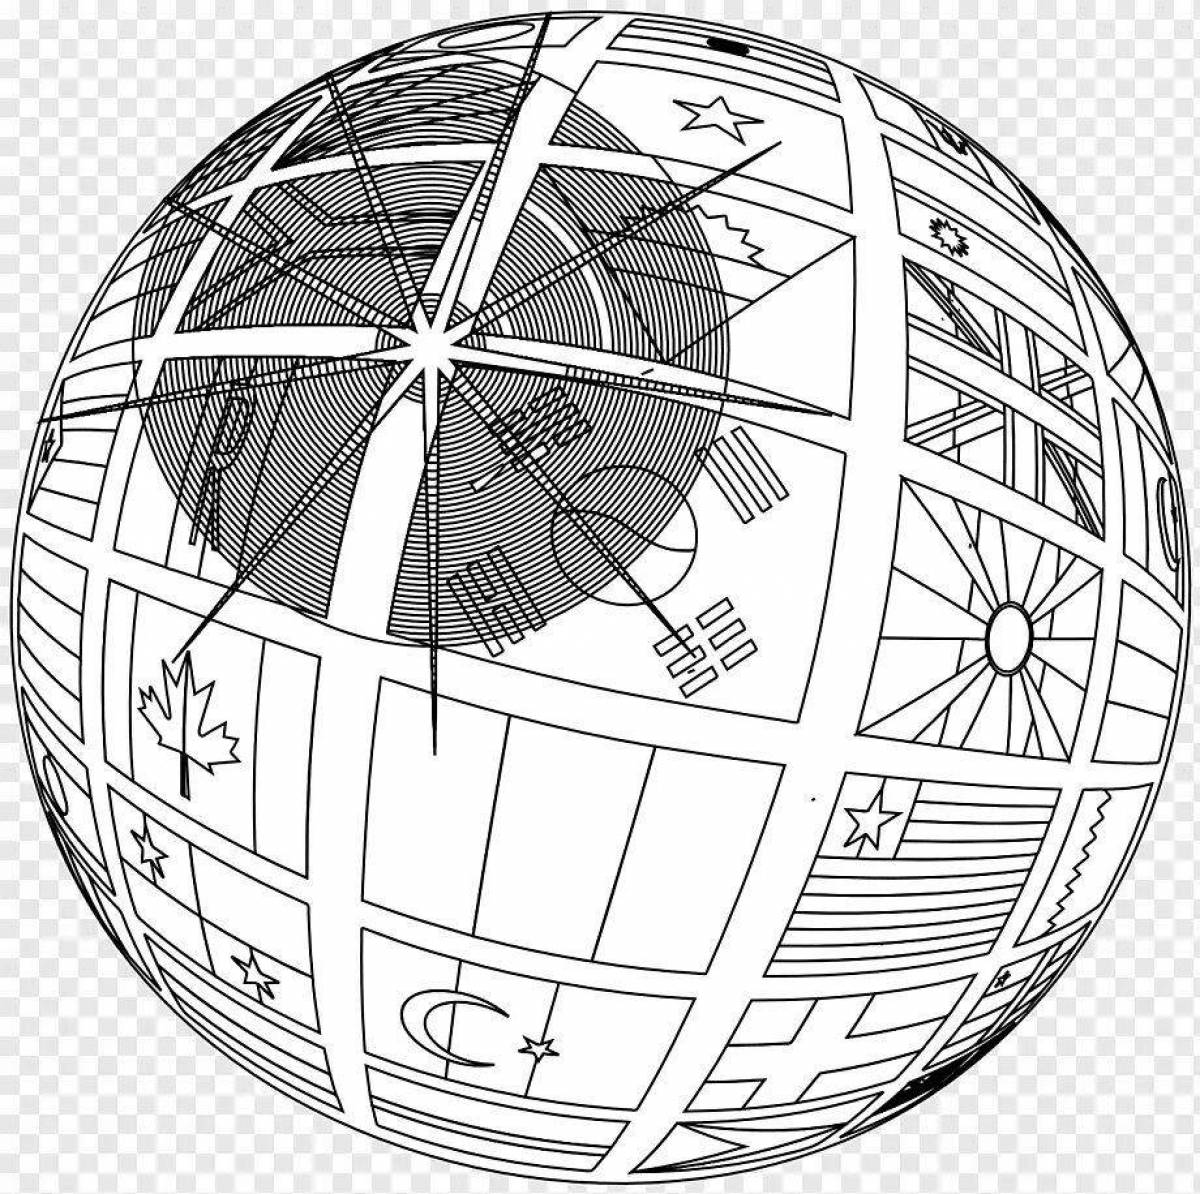 Playful equator coloring page